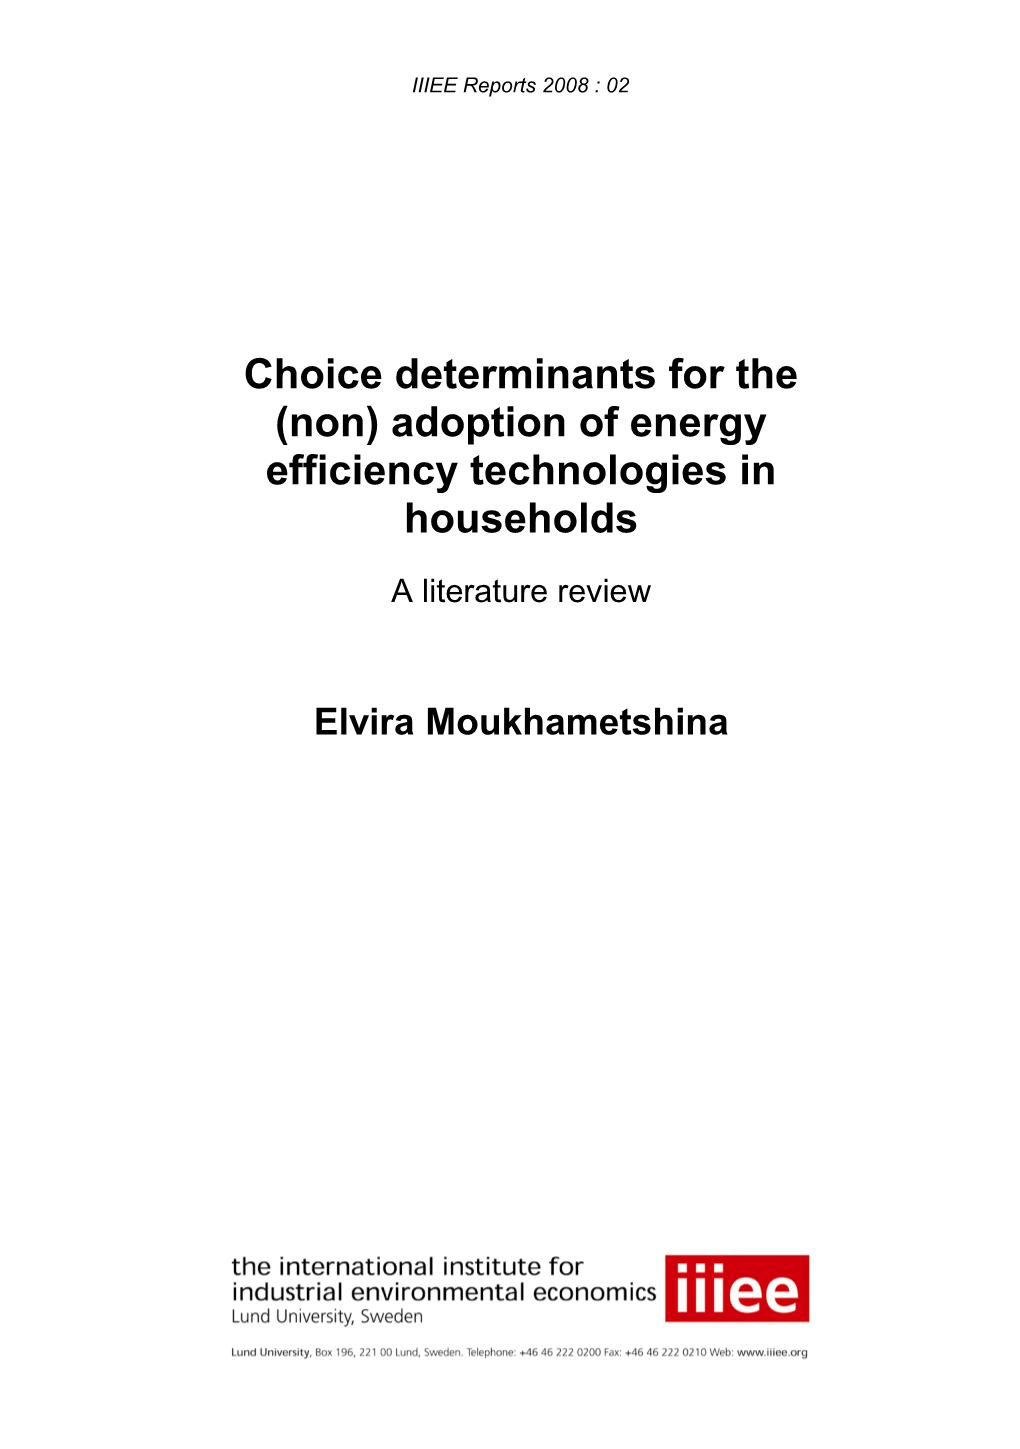 Choice Determinants for the (Non) Adoption of Energy Efficiency Technologies in Households